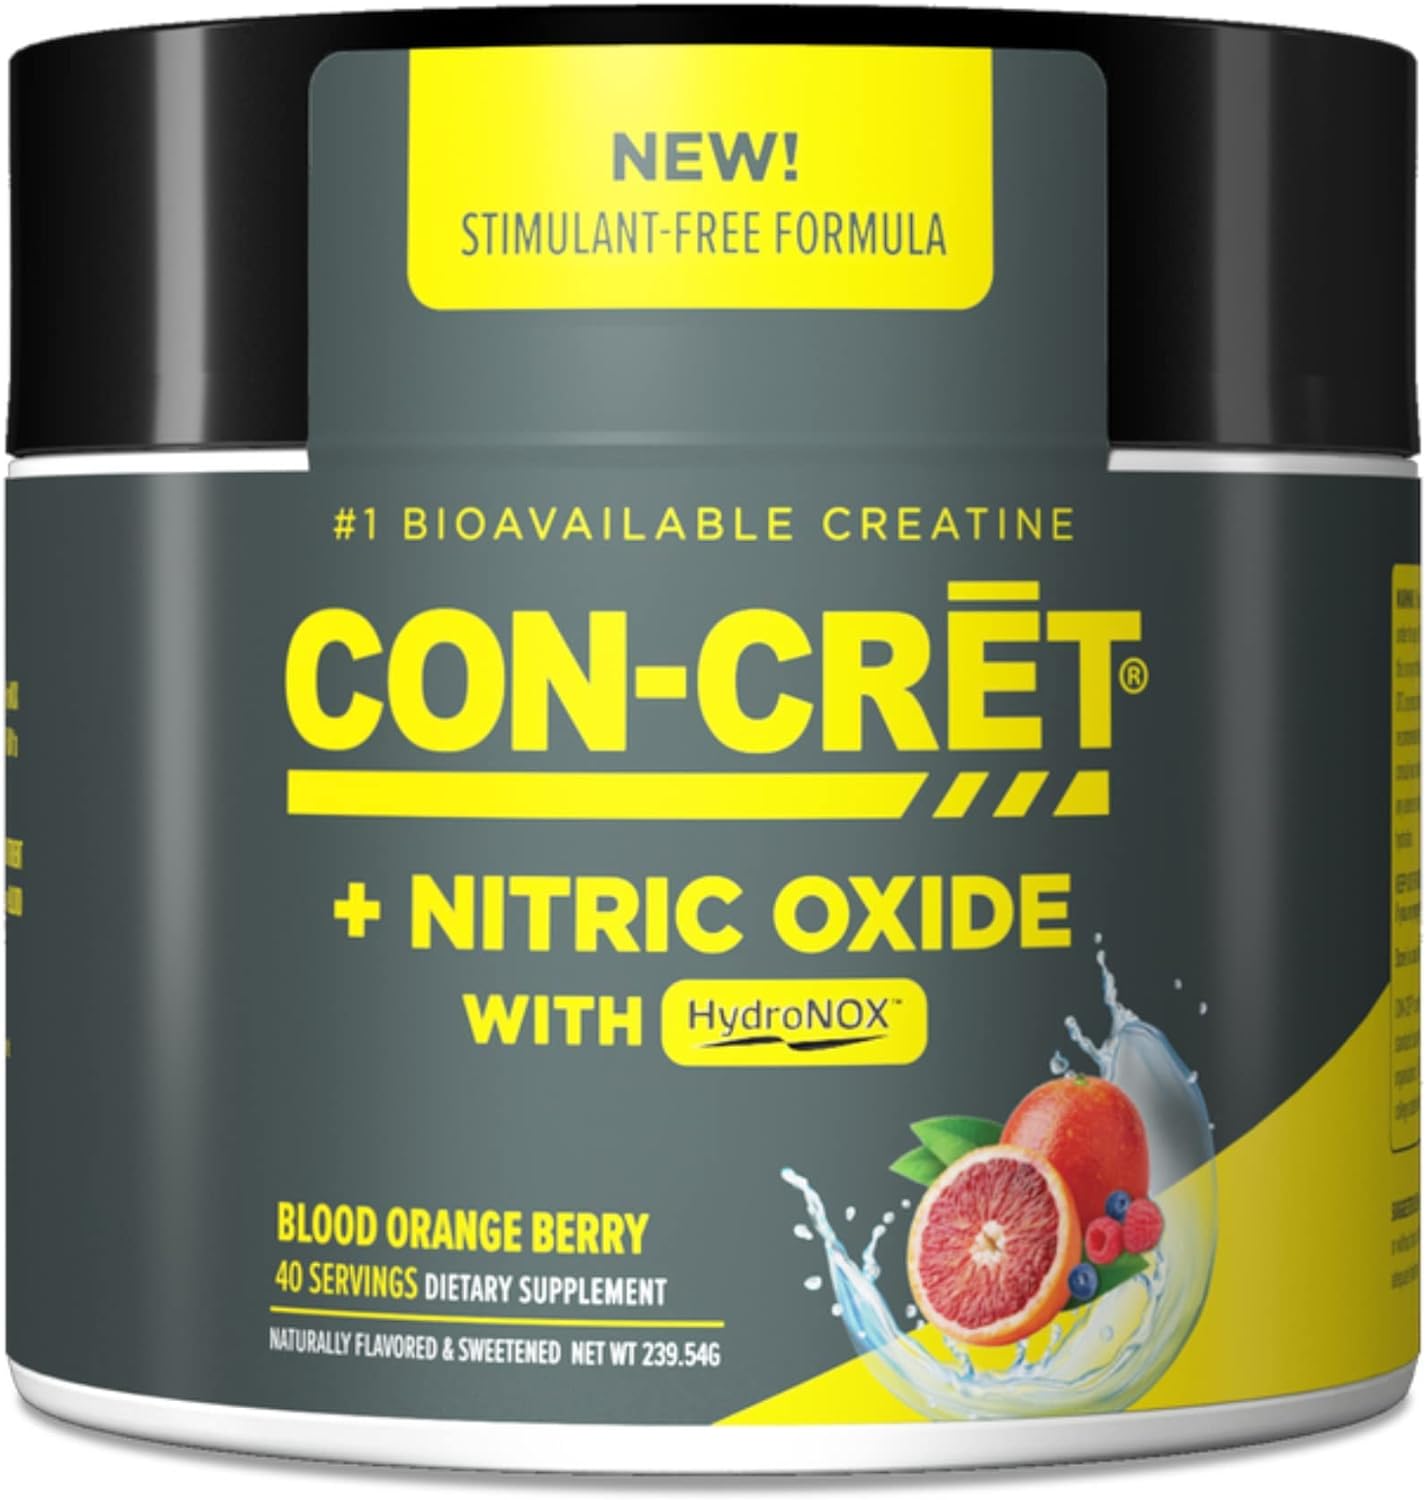 CON CRET® Nitric Oxide Booster Creatine HCl with Citrulline HCl Beet Root Powder to Support Circulation Heart Health Stimulant Free Preworkout Blood Orange Berry Flavor 40 Servings